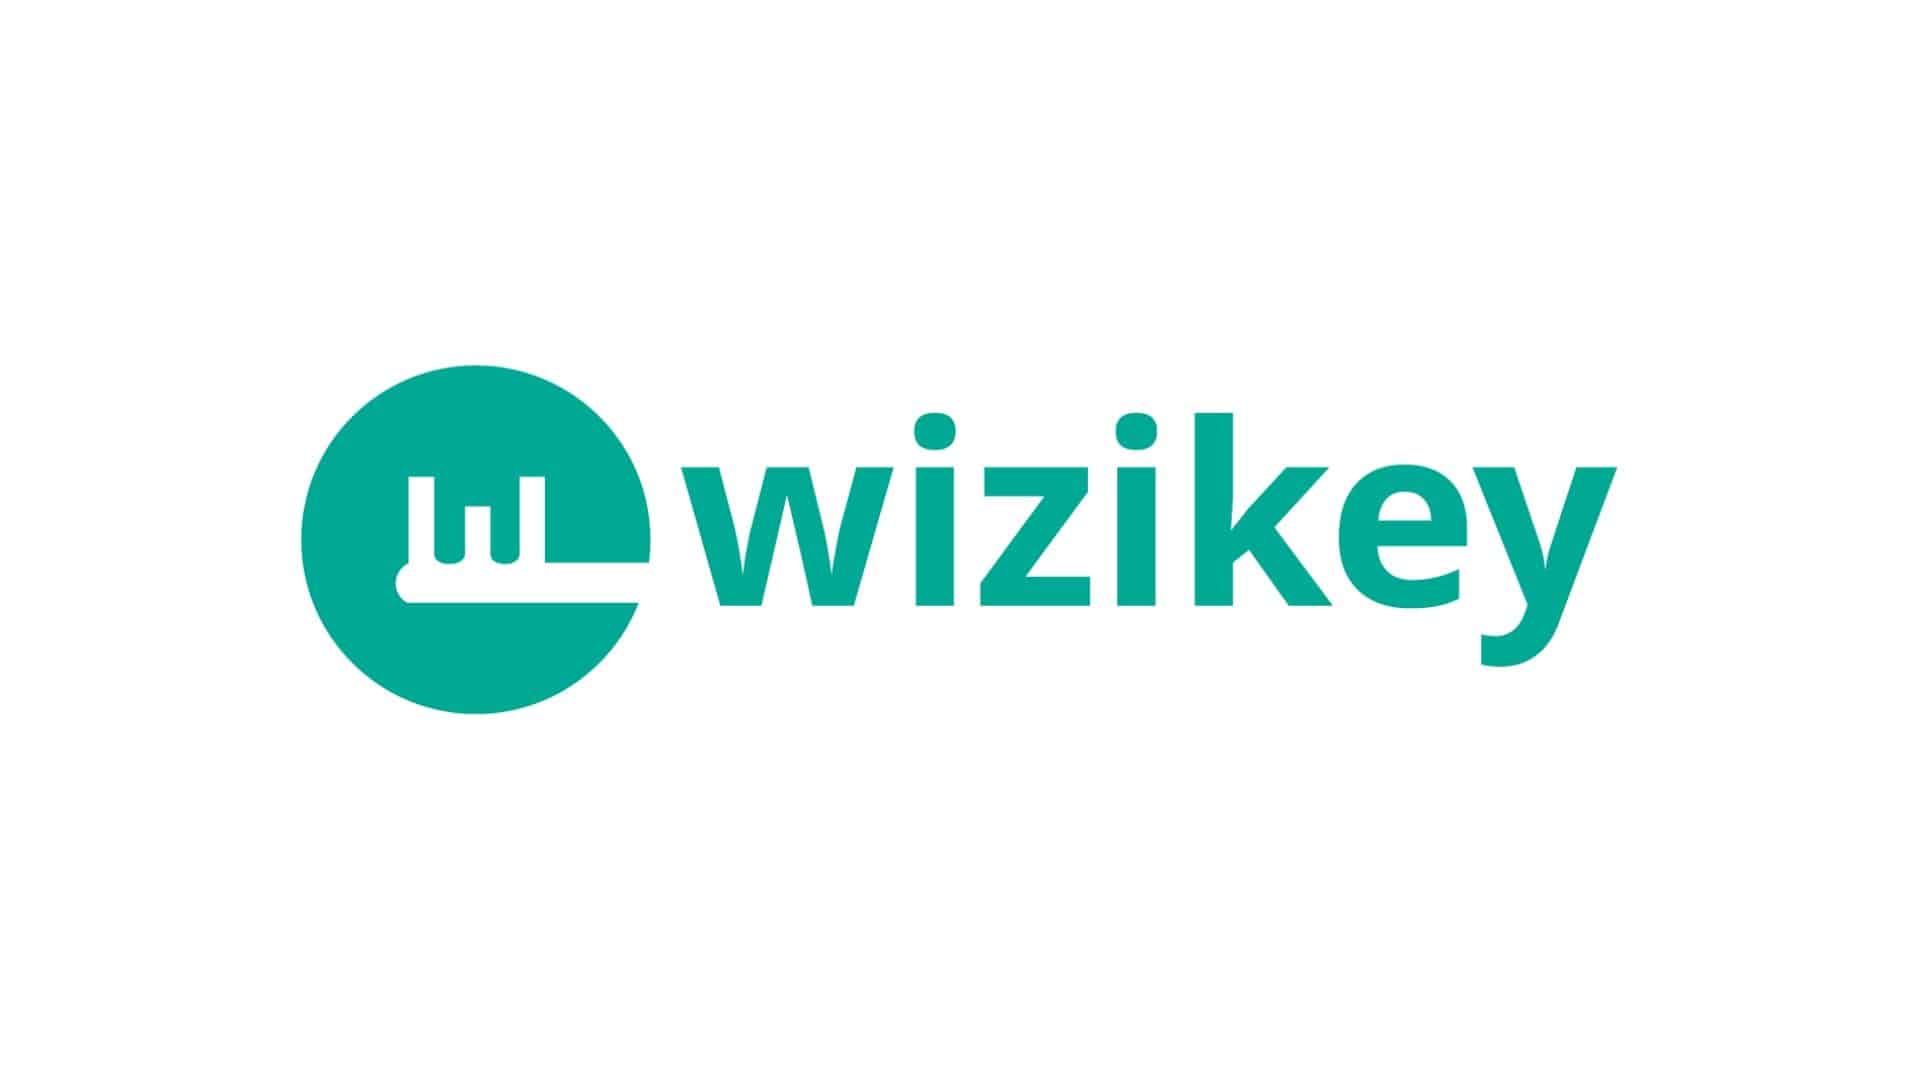 Wizikey appoints Sarah Maxwell as an investor and advisor